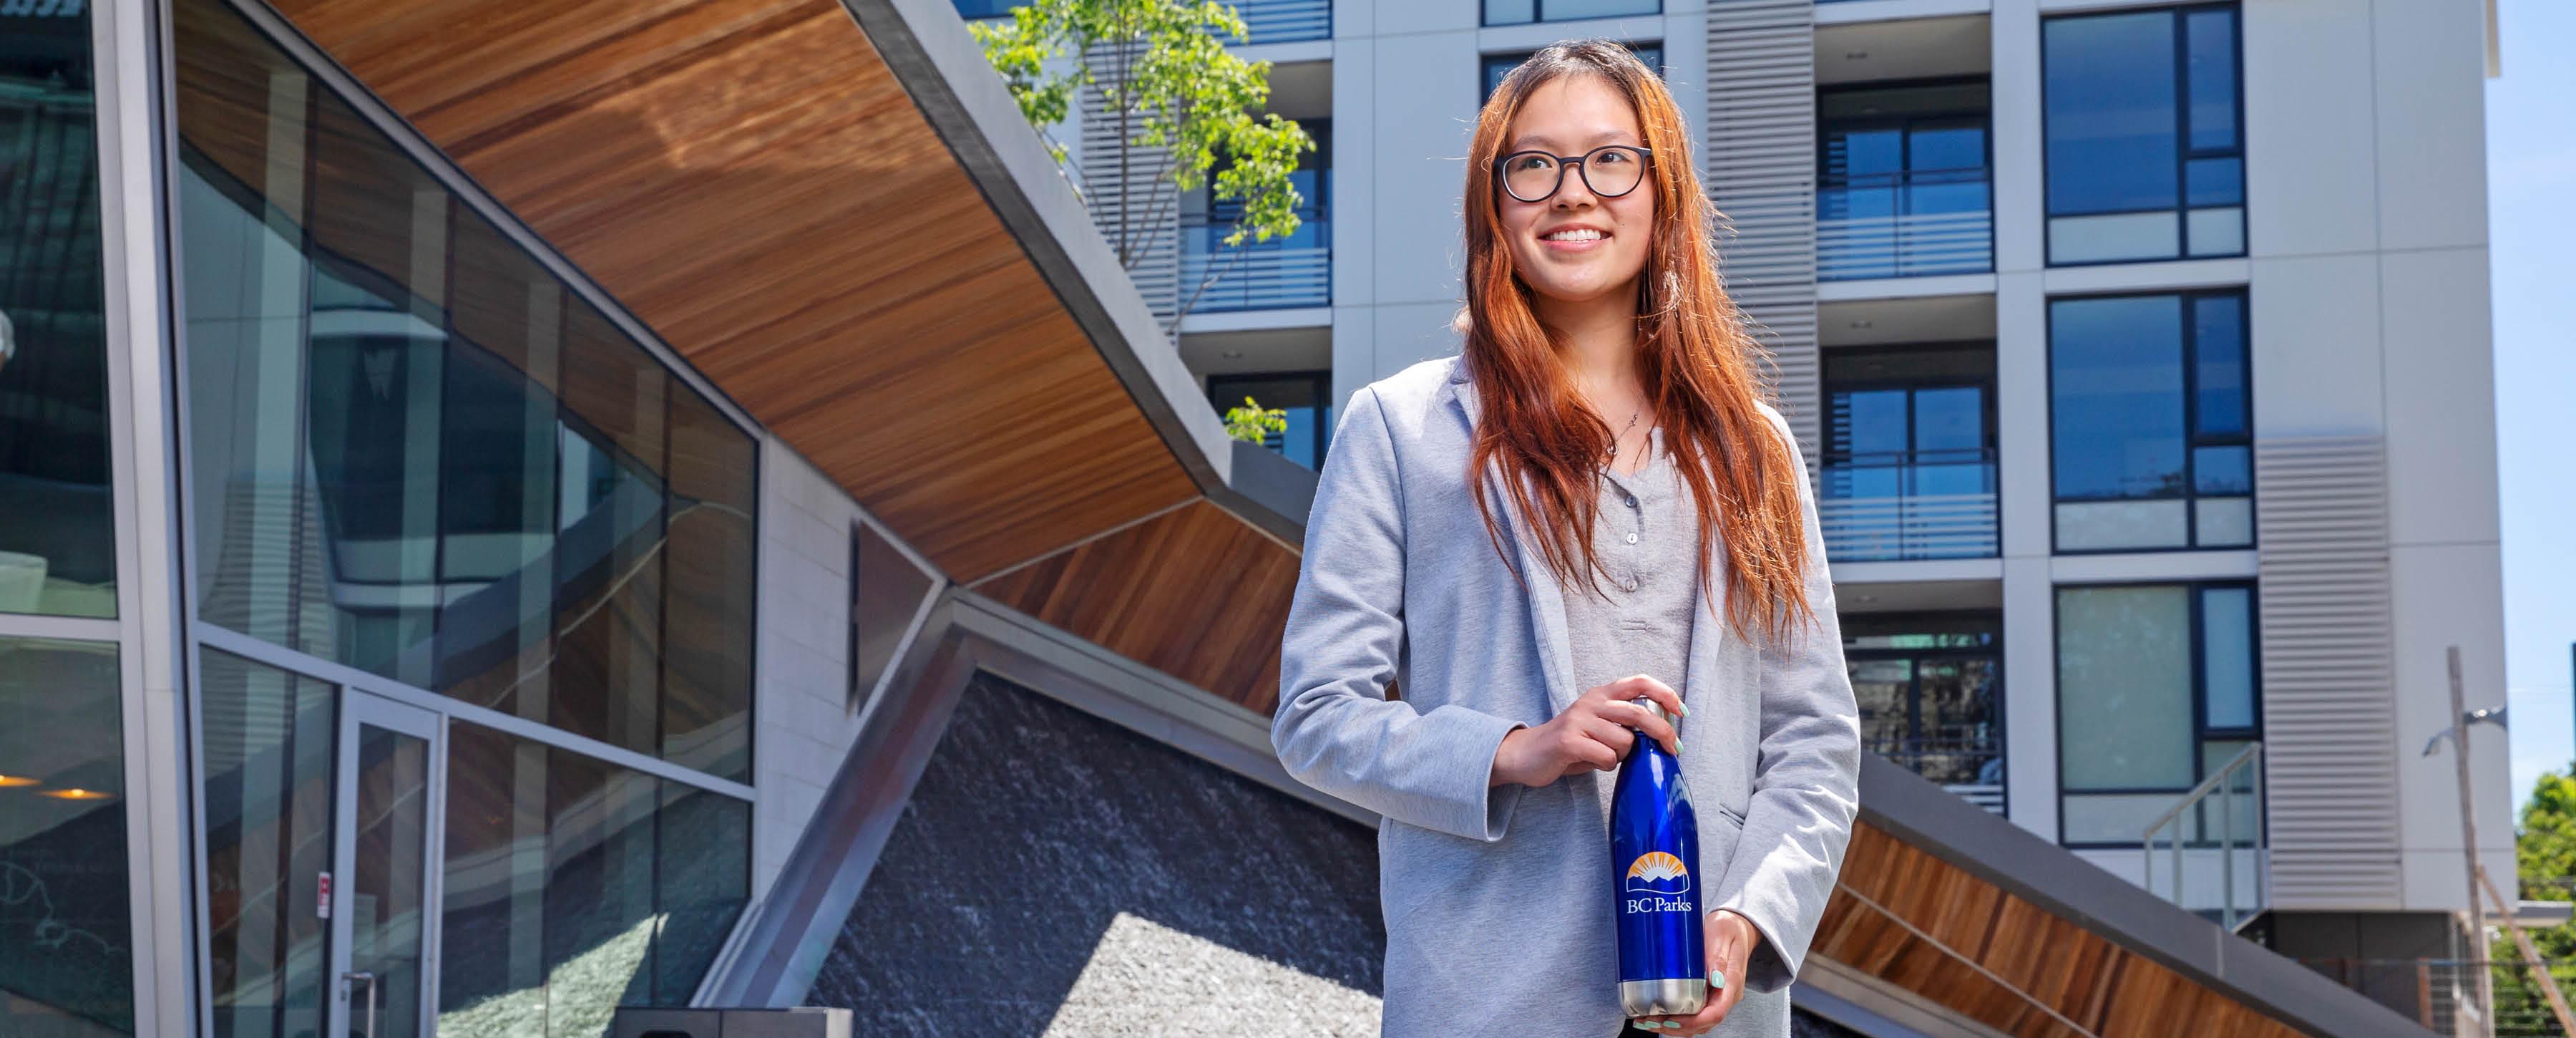 A UVic student is standing in front of a modern-looking glass and steel building. She is dressed professionally in a blazer and is smiling towards the camera.